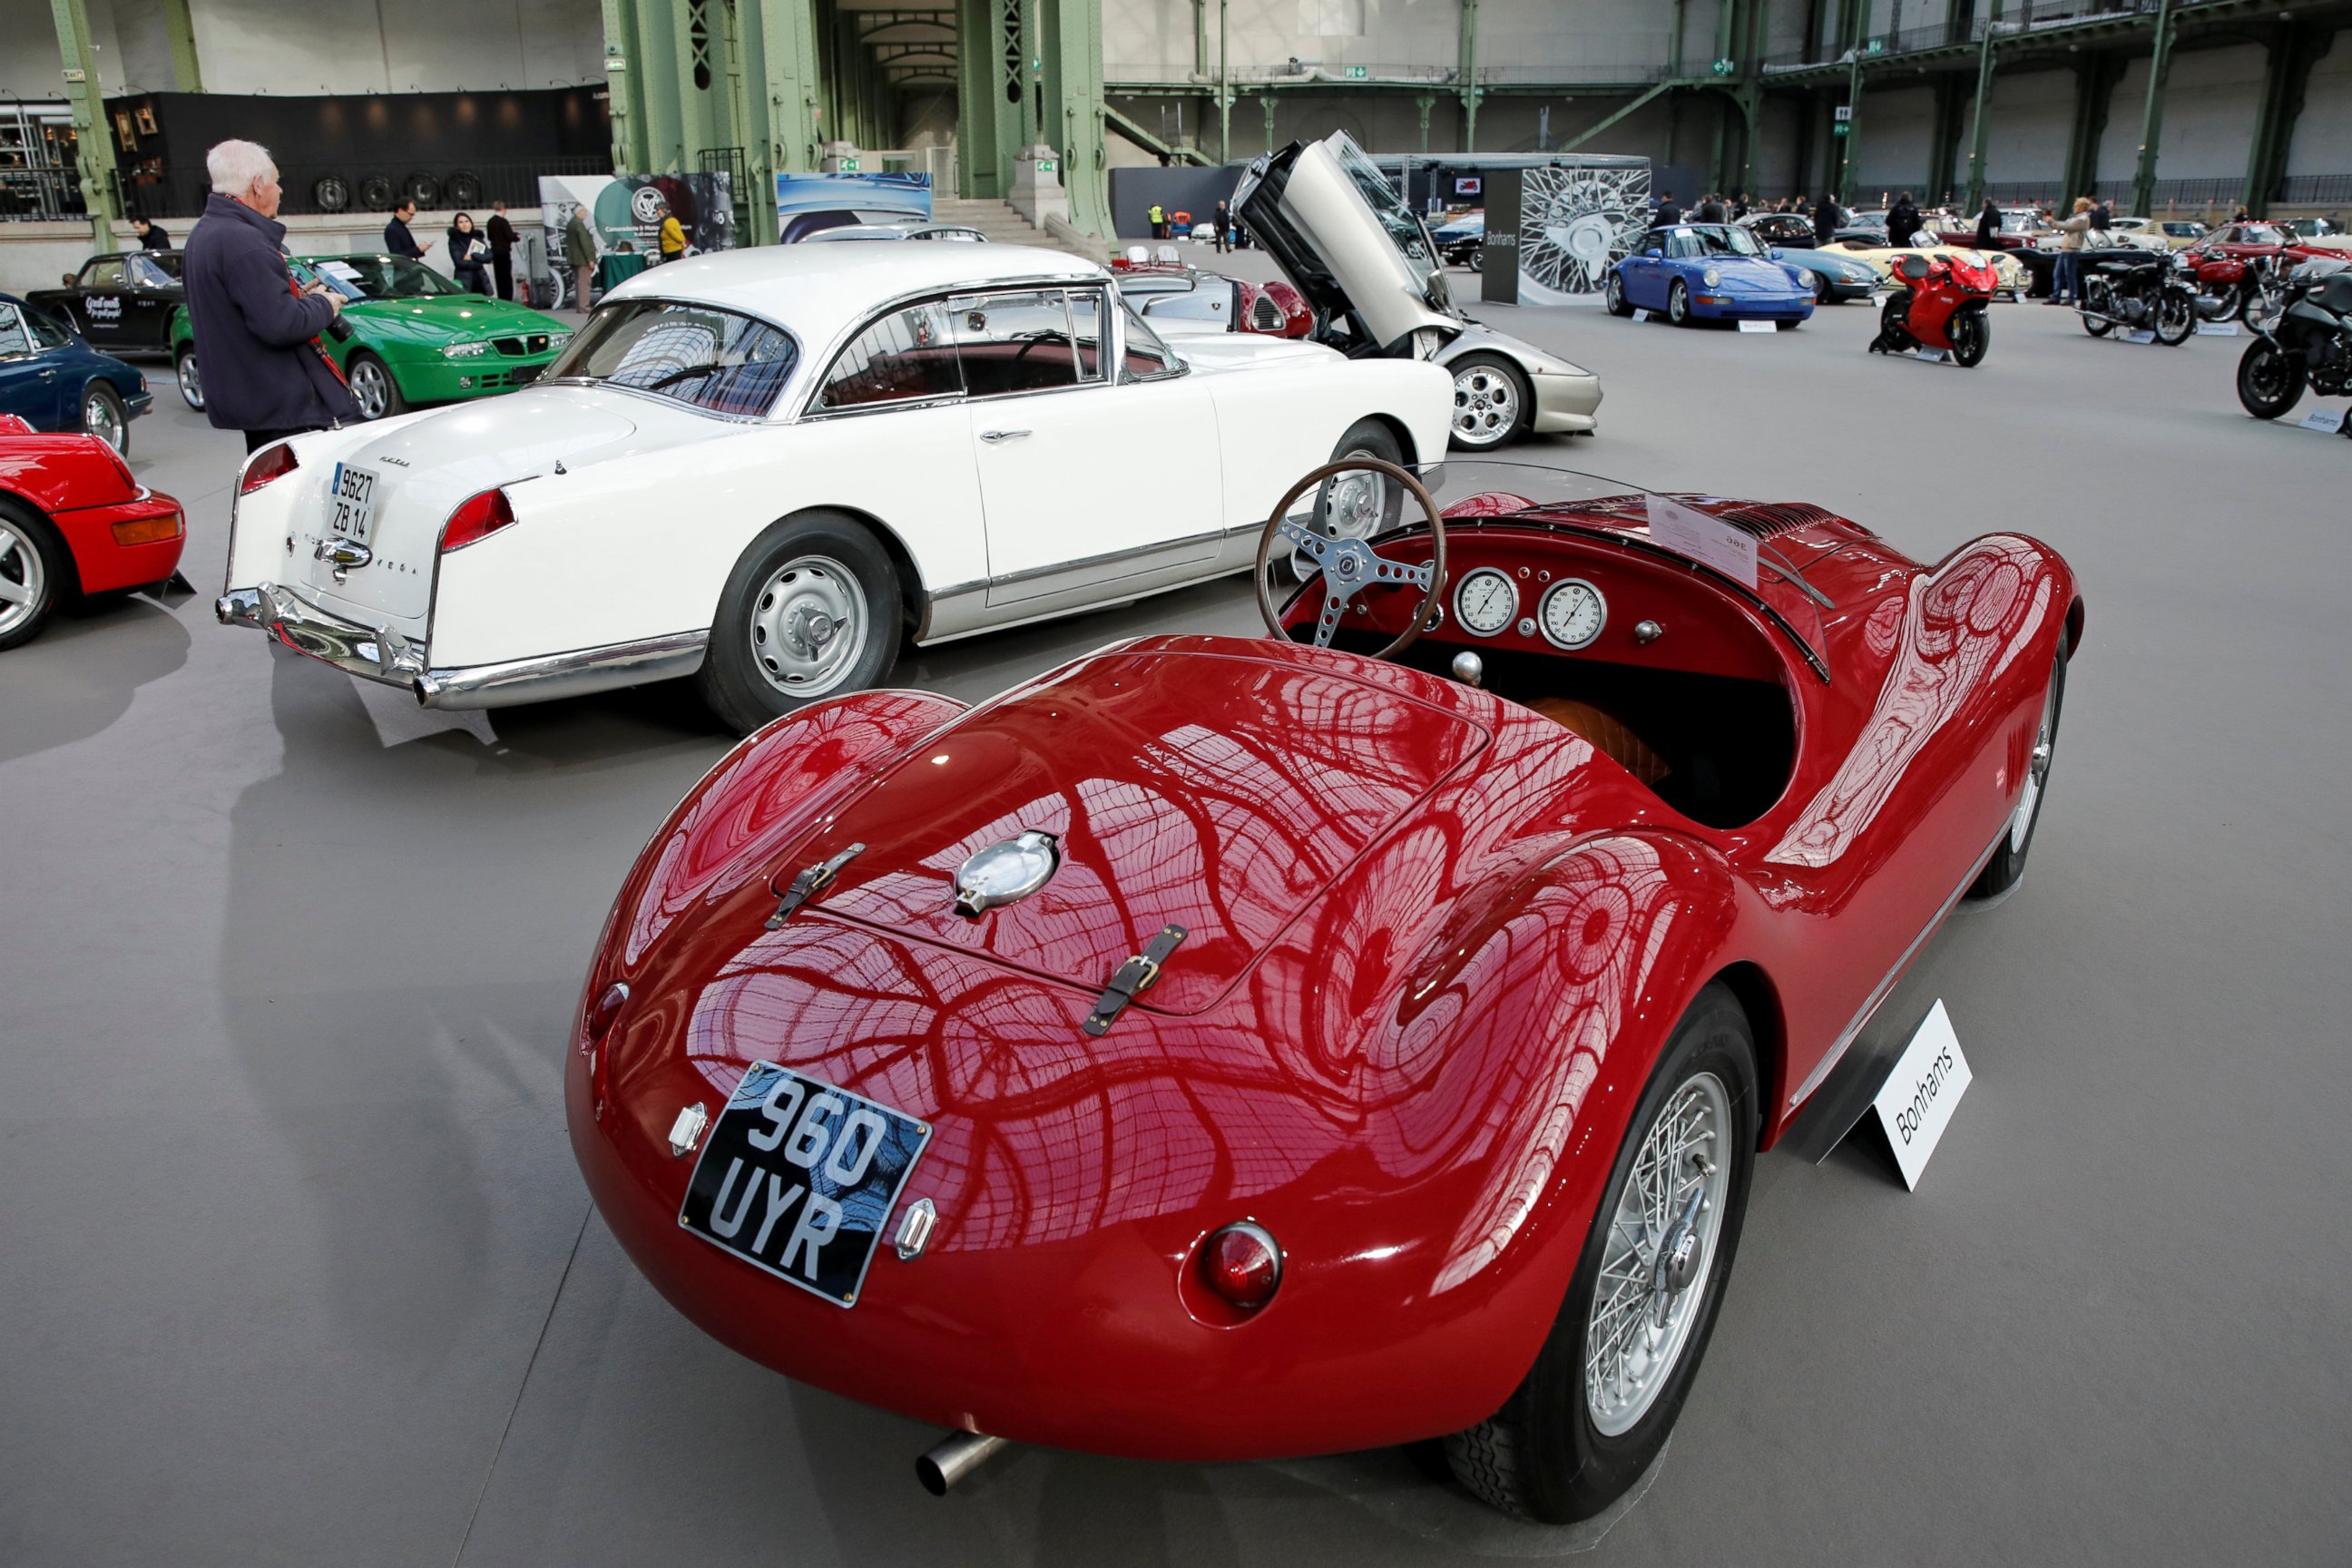 PHOTO: A OSCA-Maserati 1.5-Litre Barchetta Evocation is displayed during an exhibition of vintage and classic cars  by Bonhams auction house at the Grand Palais during the Retromobile week in Paris, France, Feb. 8, 2017. 